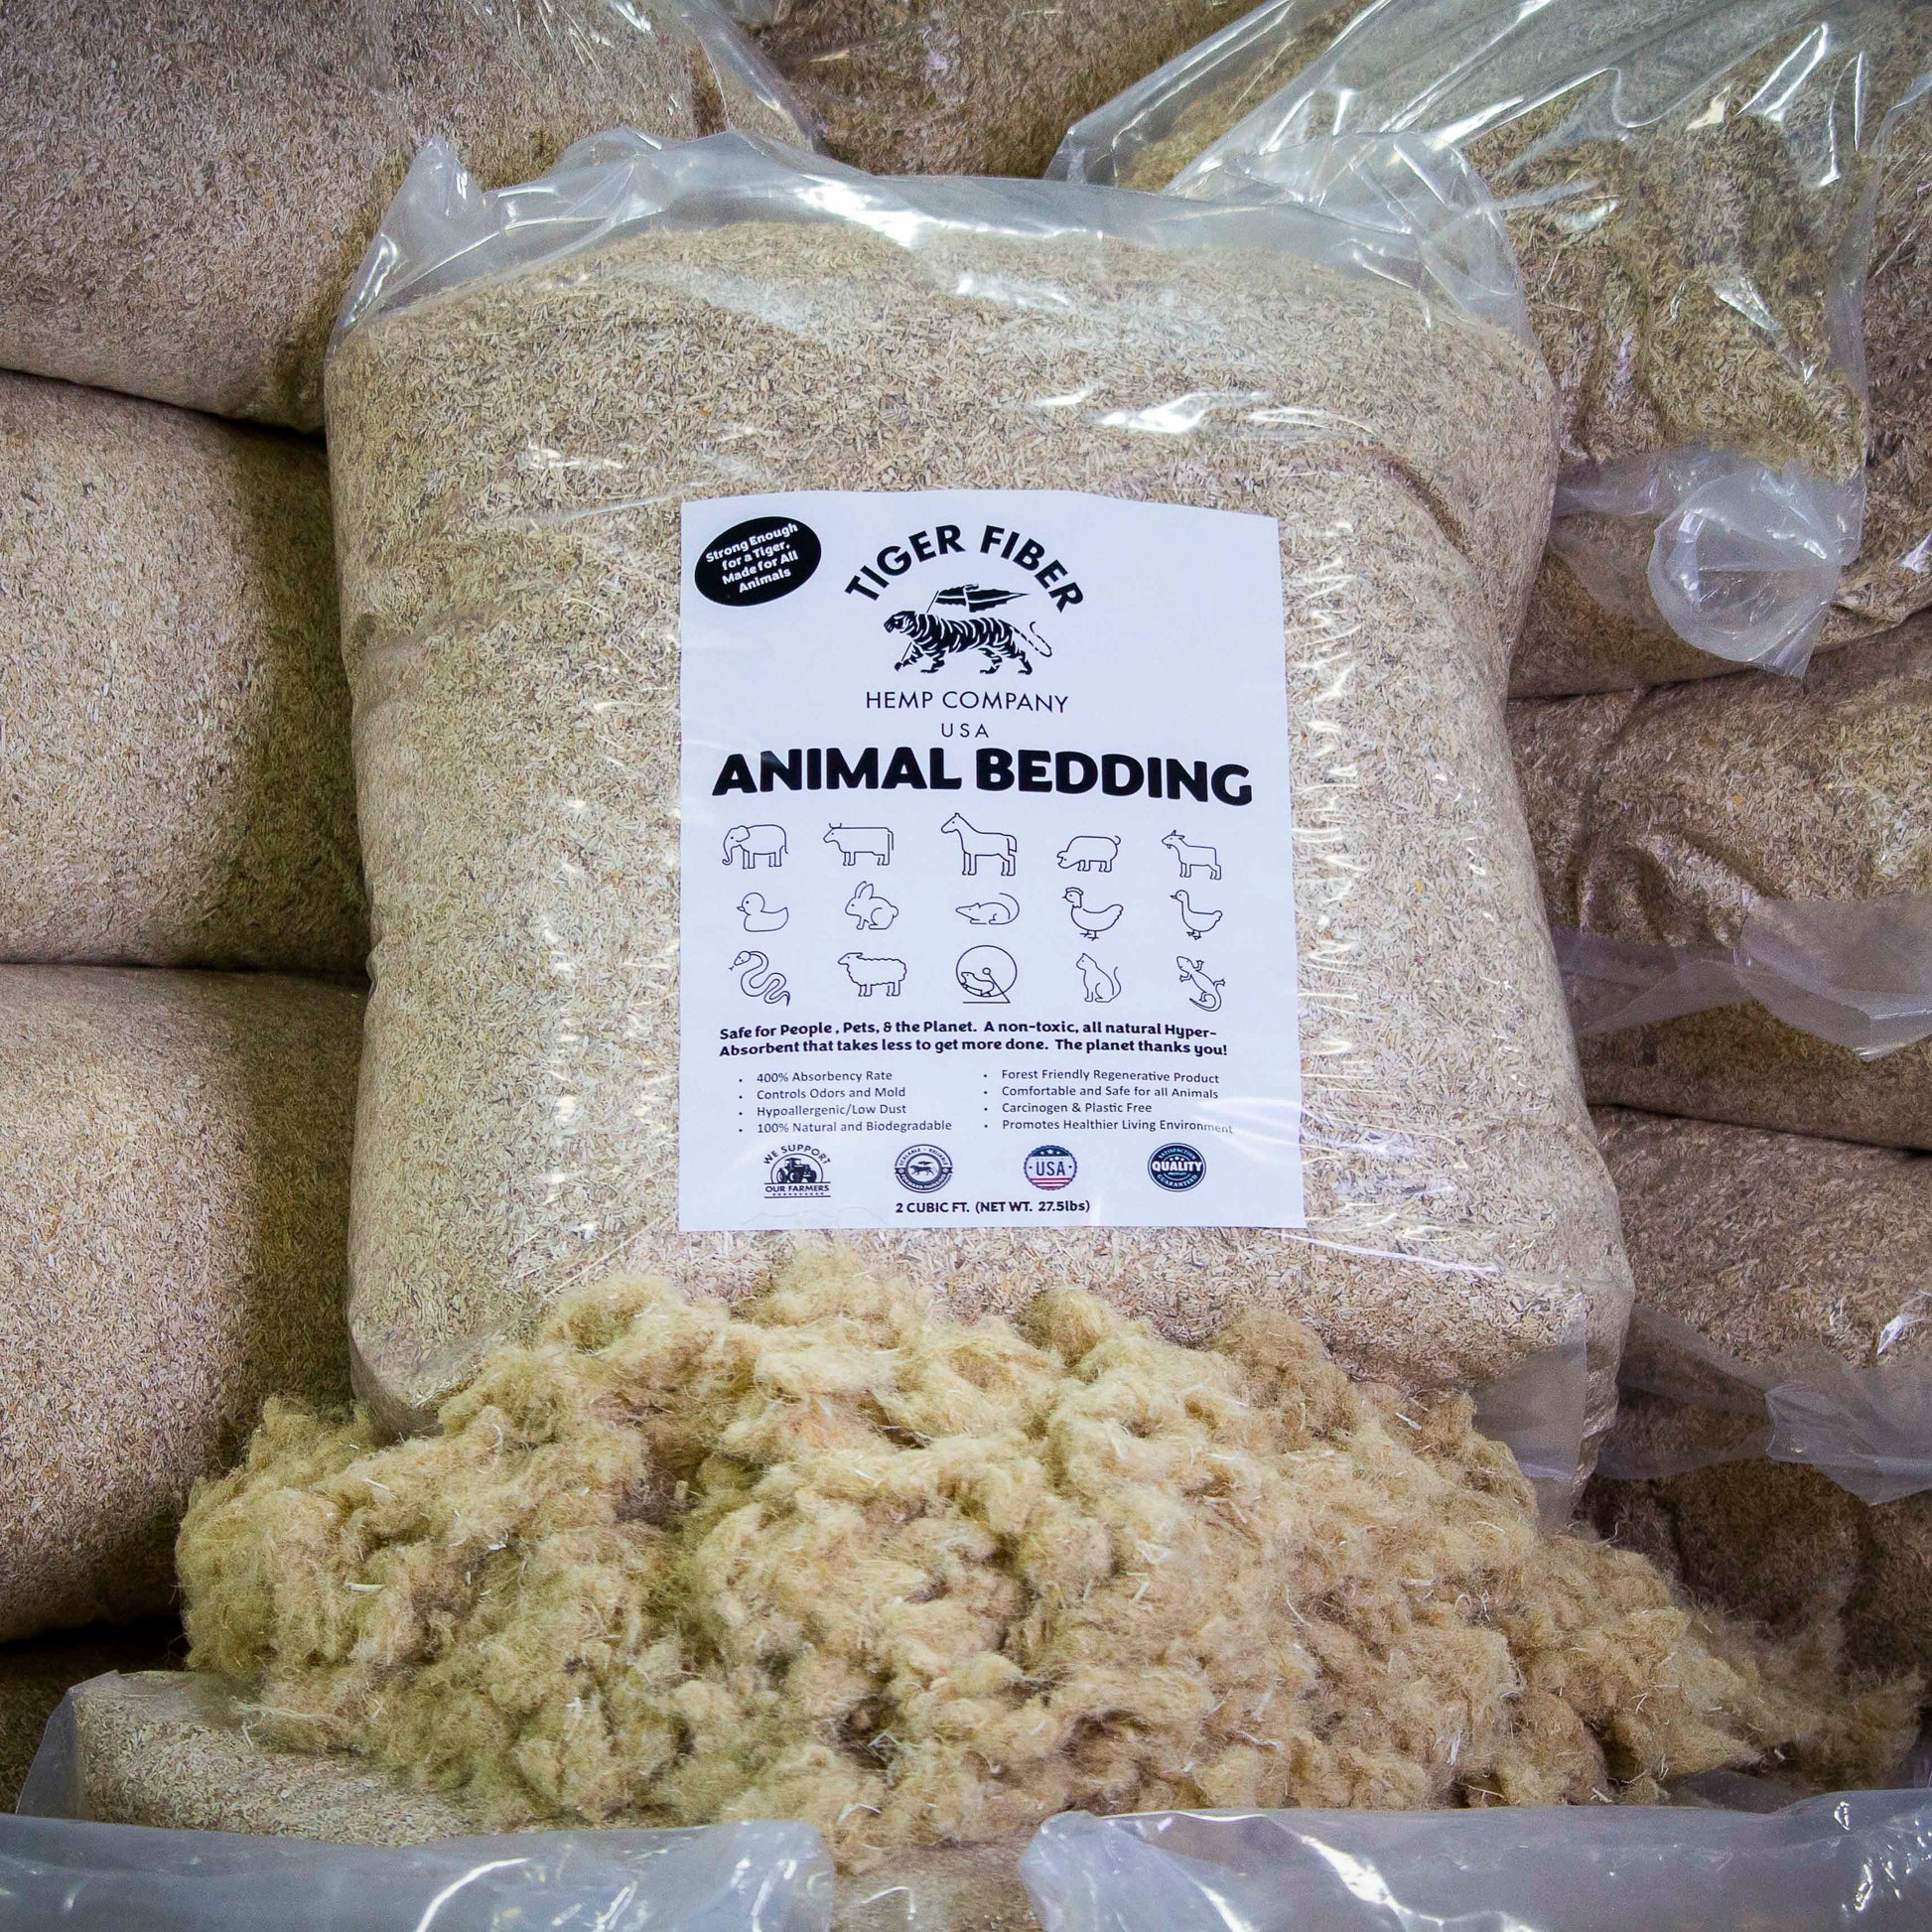 A 27.5 pound translucent packaged bag of hemp Animal Bedding sits on top of raw hemp fiber in front of stacked piles of the same product.